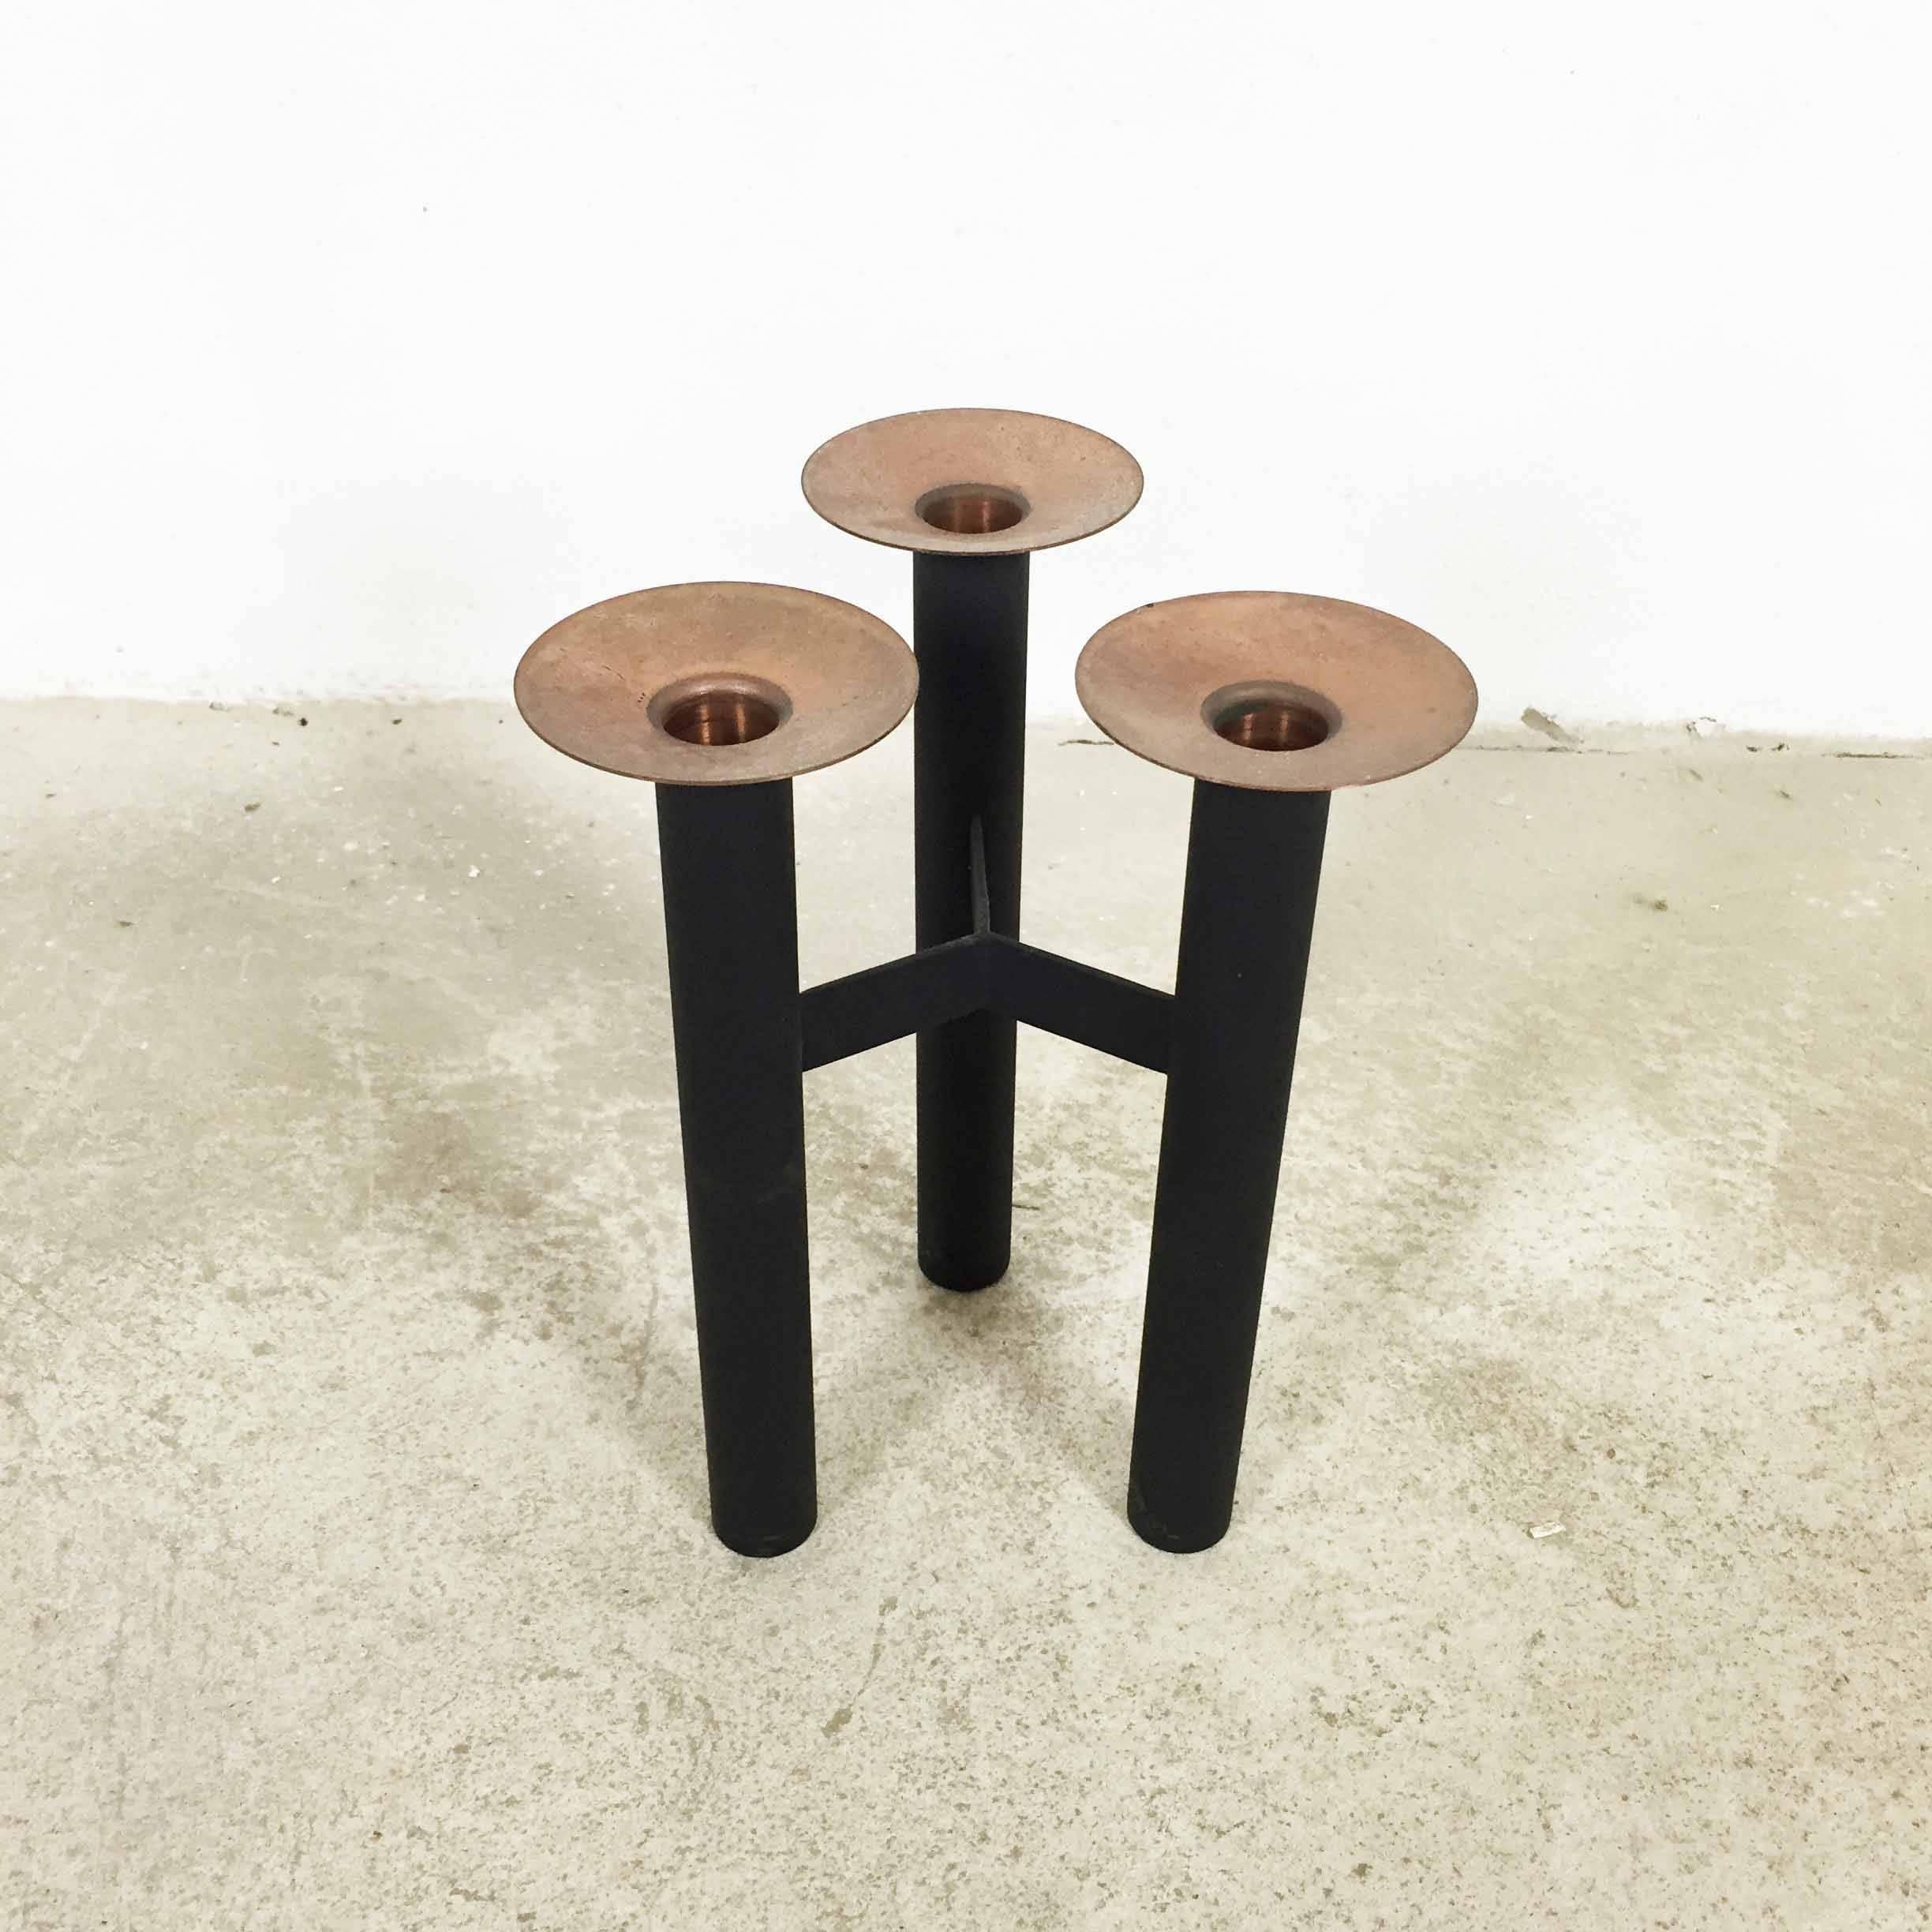 Modernist candleholder made in Denmark

Original 1960s candleholder made in Denmark. This candleholder element is made of solid metal and has a tripod base. The candle stick tops have a copper tone finish. This item remains in a good vintage